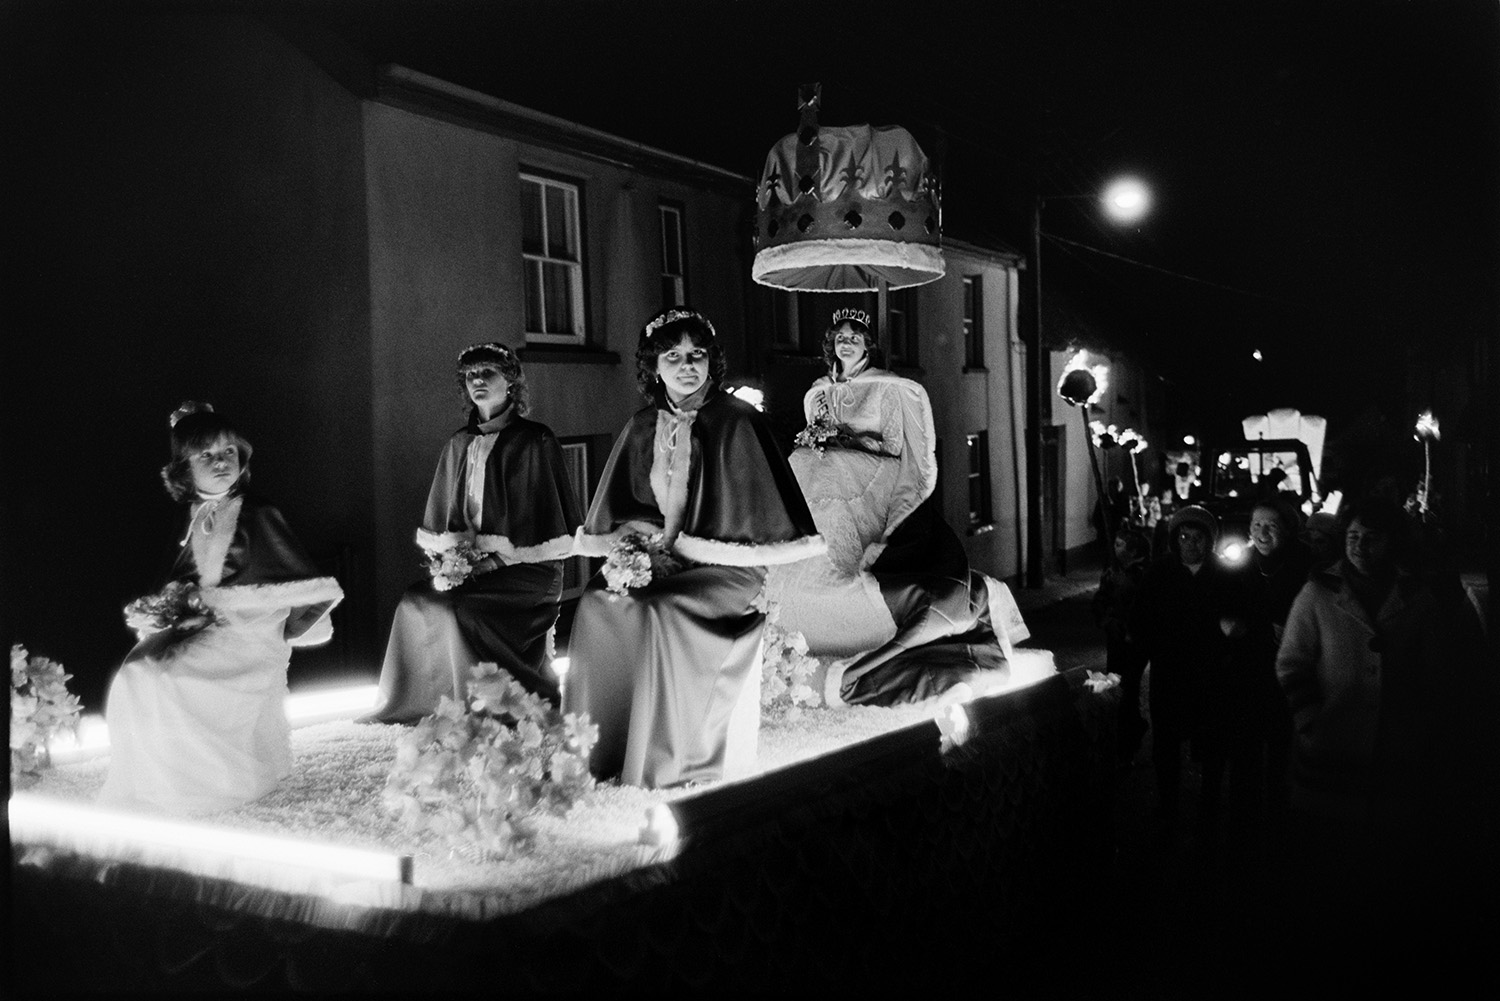 Flares and floats at night. <br /> [The Hatherleigh Carnival Queen and her attendants on a carnival float parading through a street at Hatherleigh Carnival. People carrying flaming torches are following them in the parade.]